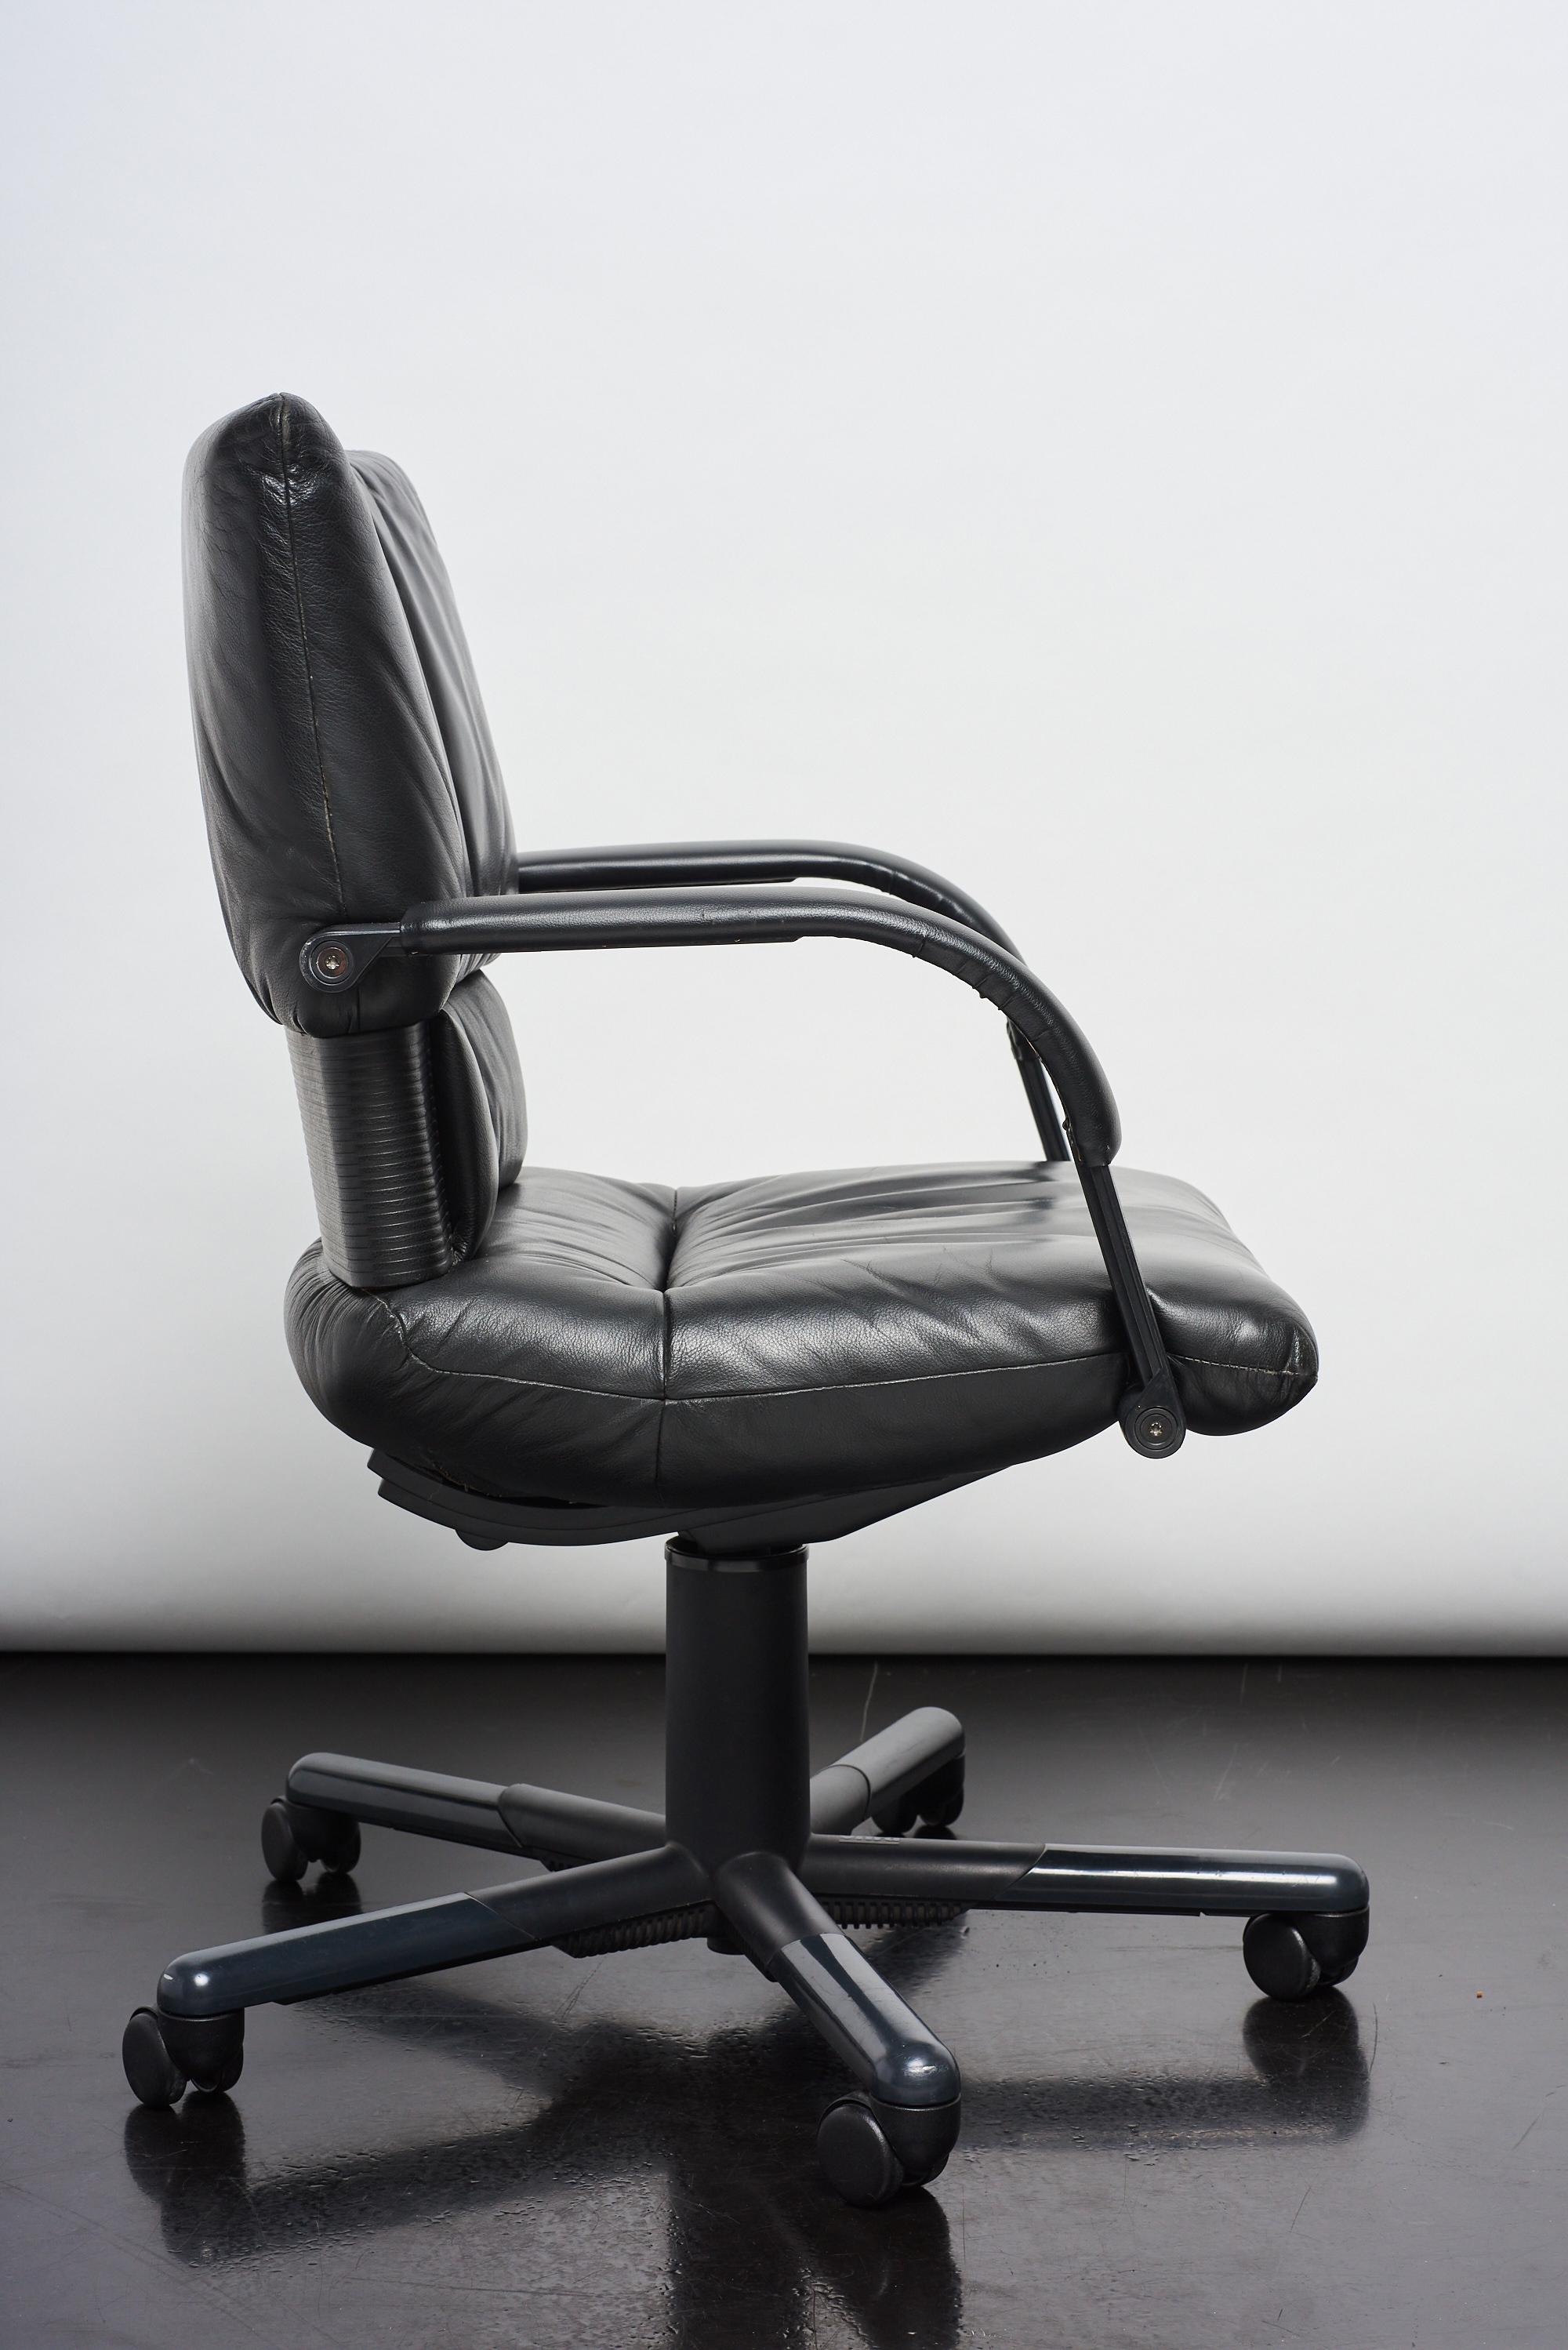 Luxurious leather office chair “Figura” designed and signed by Mario Bellini for Vitra,1990s.
“Figura” combines three important ergonomic functions in one chair, creating the optimum requirements for ergonomically correct settings.
The backrest is